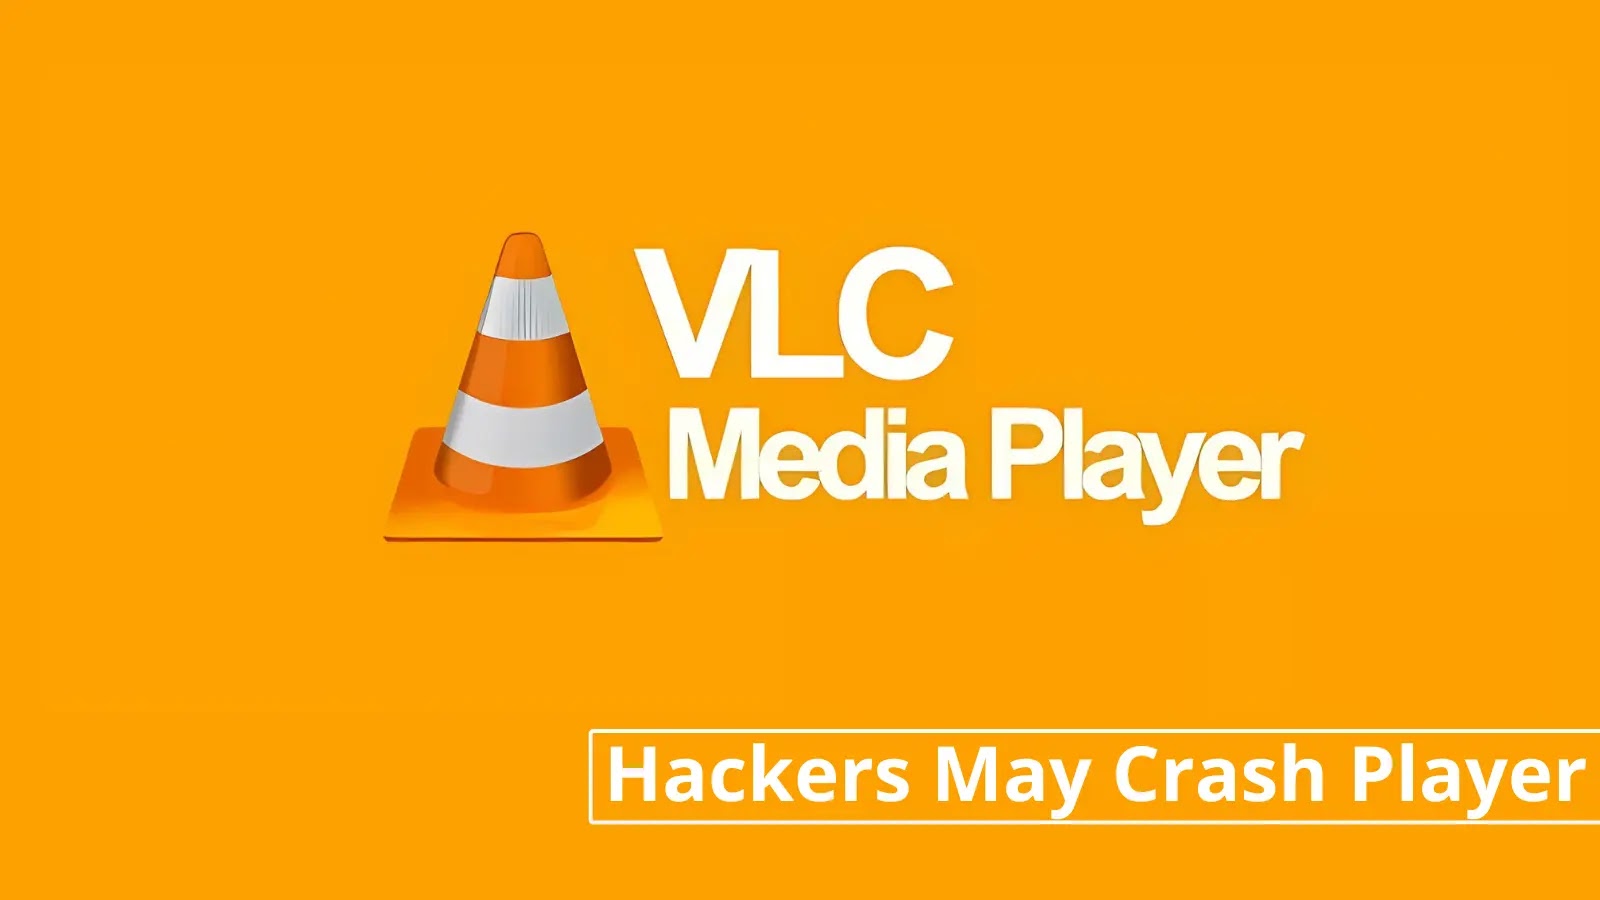 VLC Media Player Vulnerabilities Allow Remote Code Execution